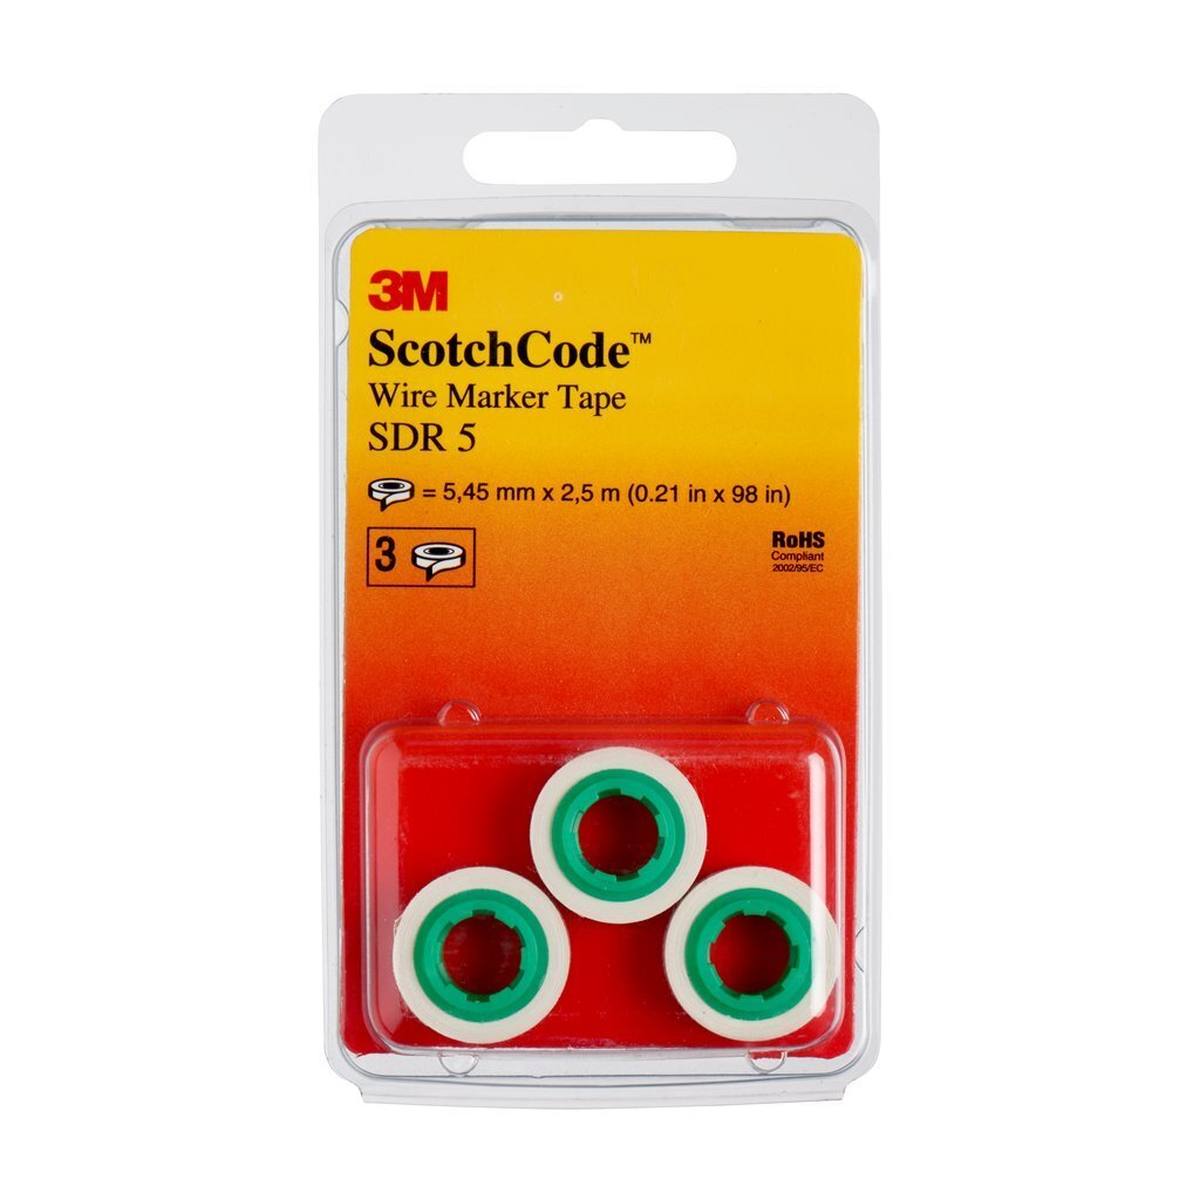 3M ScotchCode SDR-5 cable marker refill rolls, number 5, pack of 3